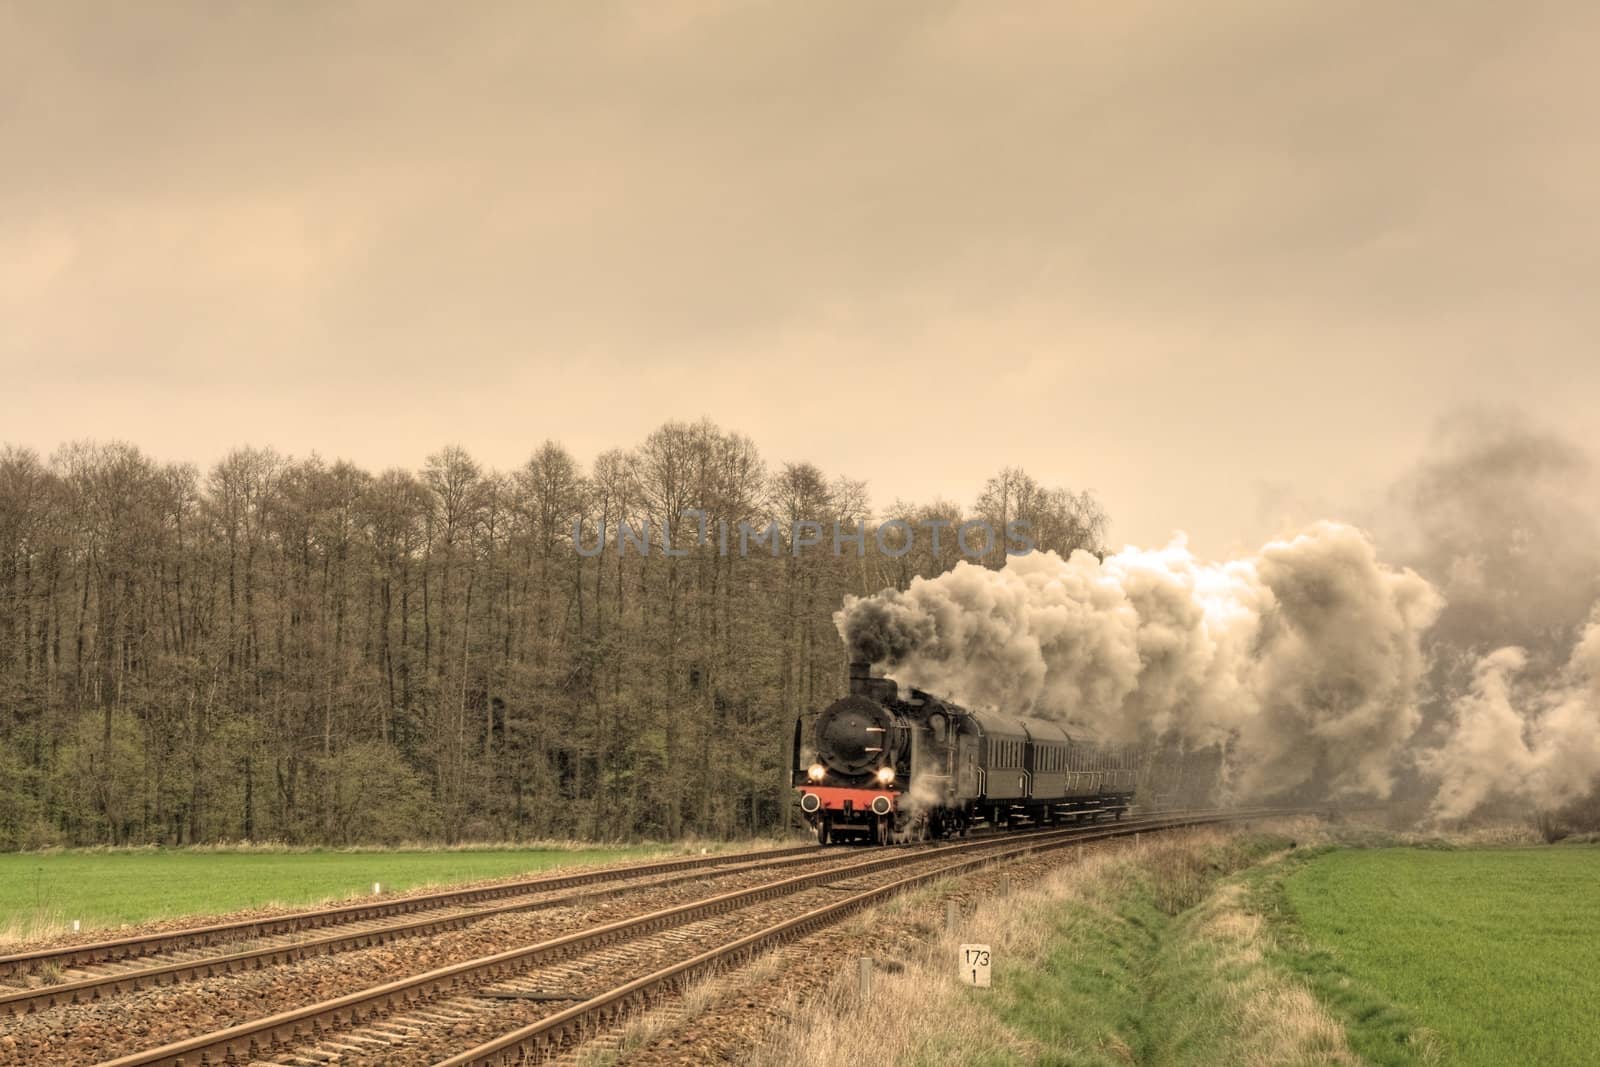 Old retro steam train passing through countryside
